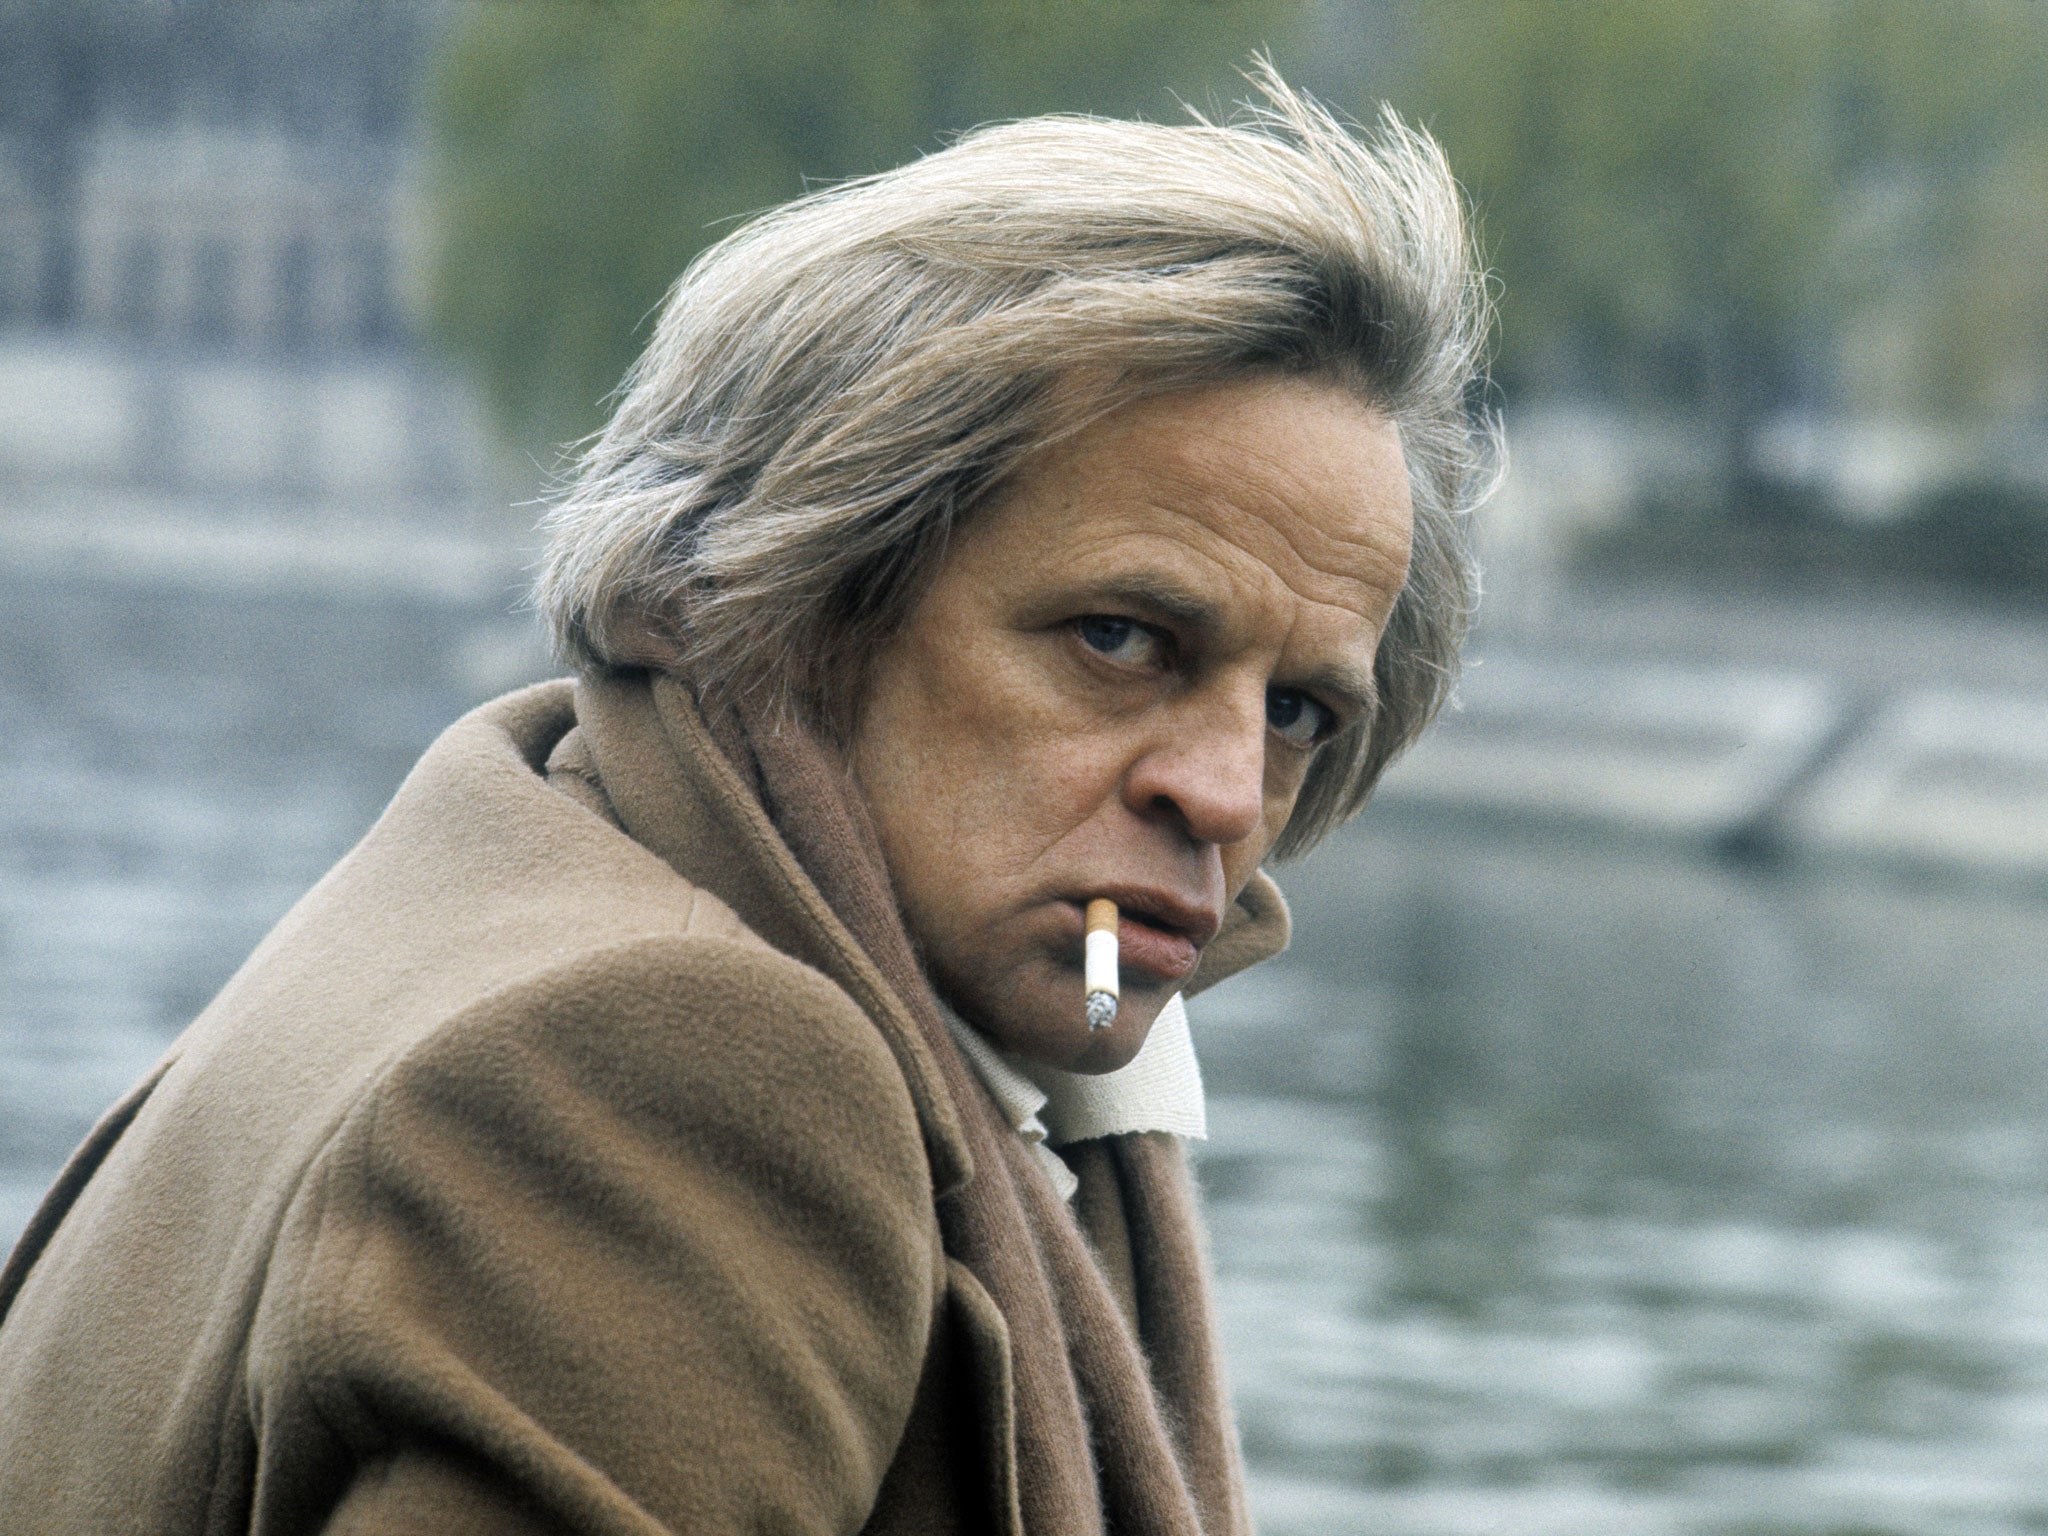 Klaus Kinski: His daughter has accused the late actor of repeatedly raping her